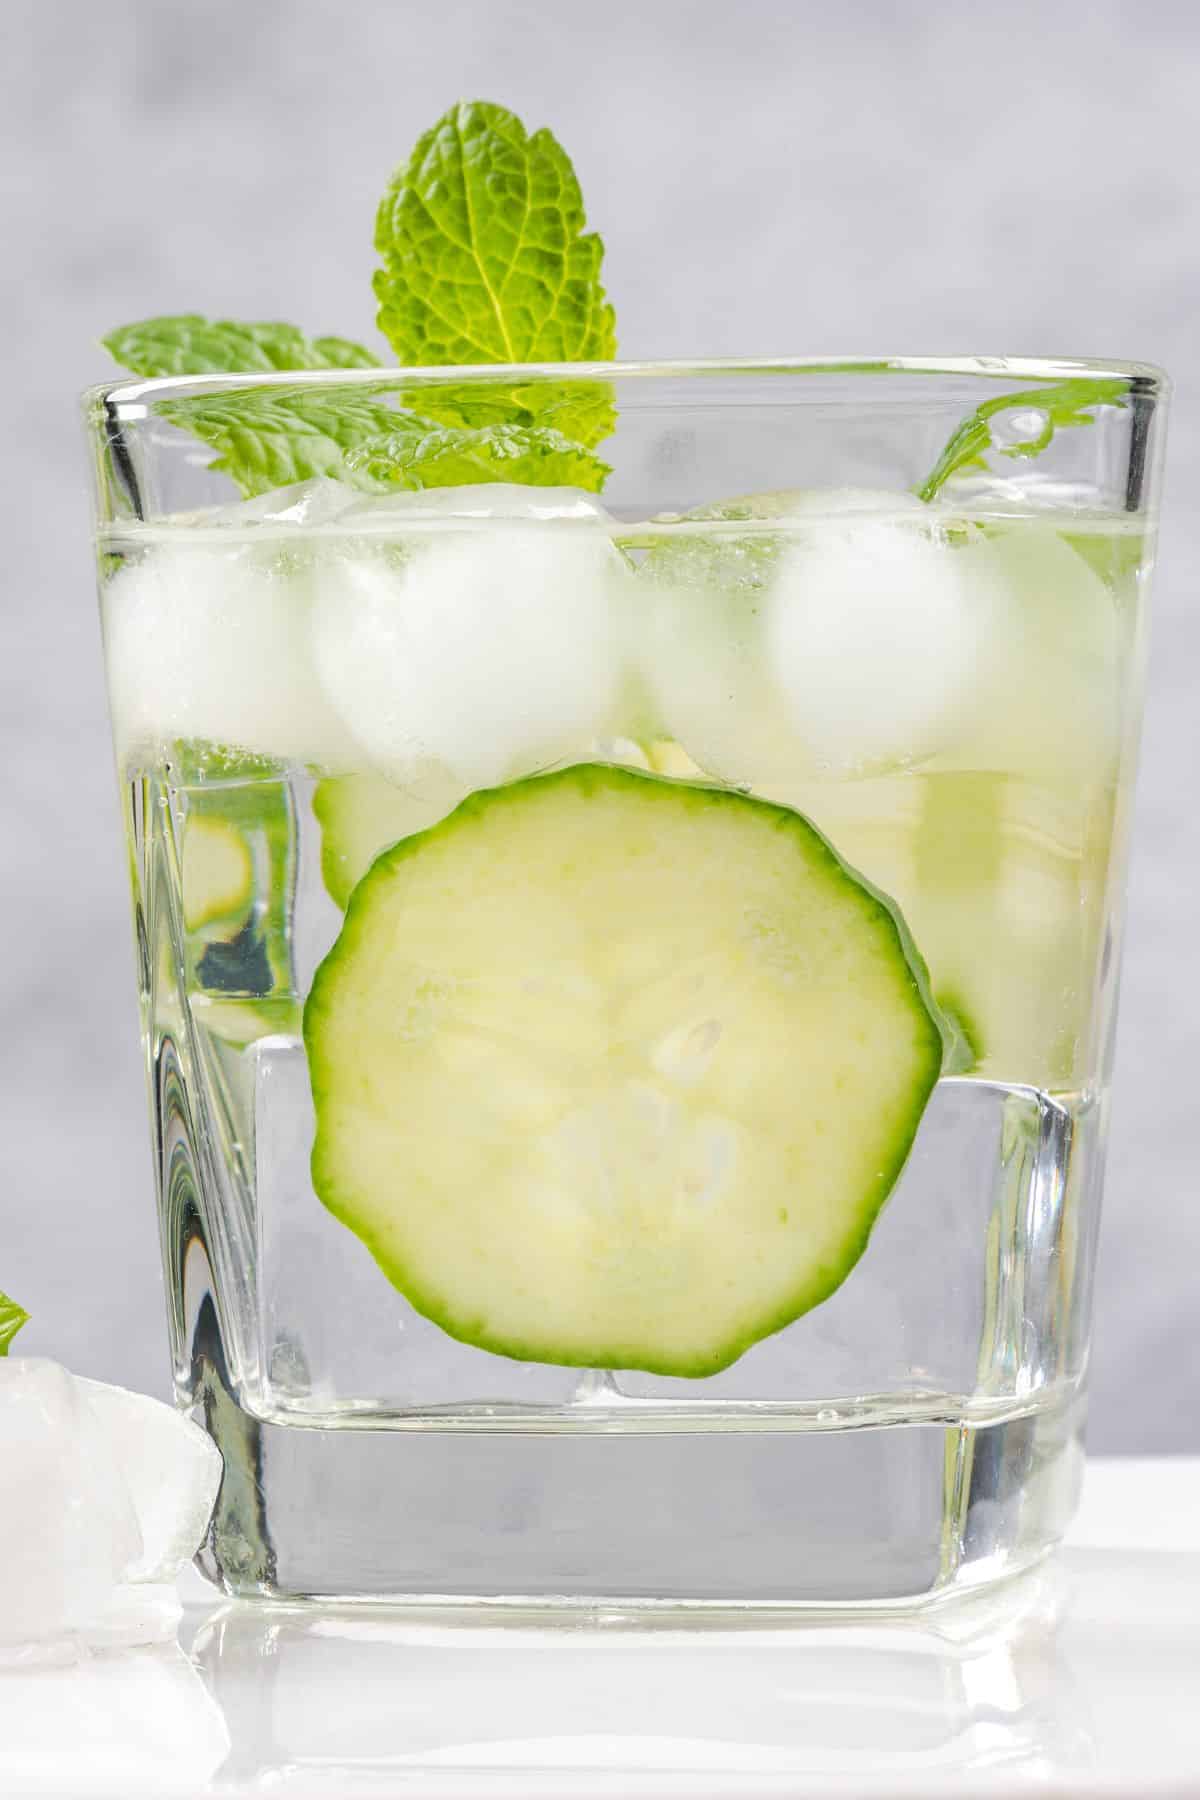 A glass of water with fresh cucumber slices and ice cubes.